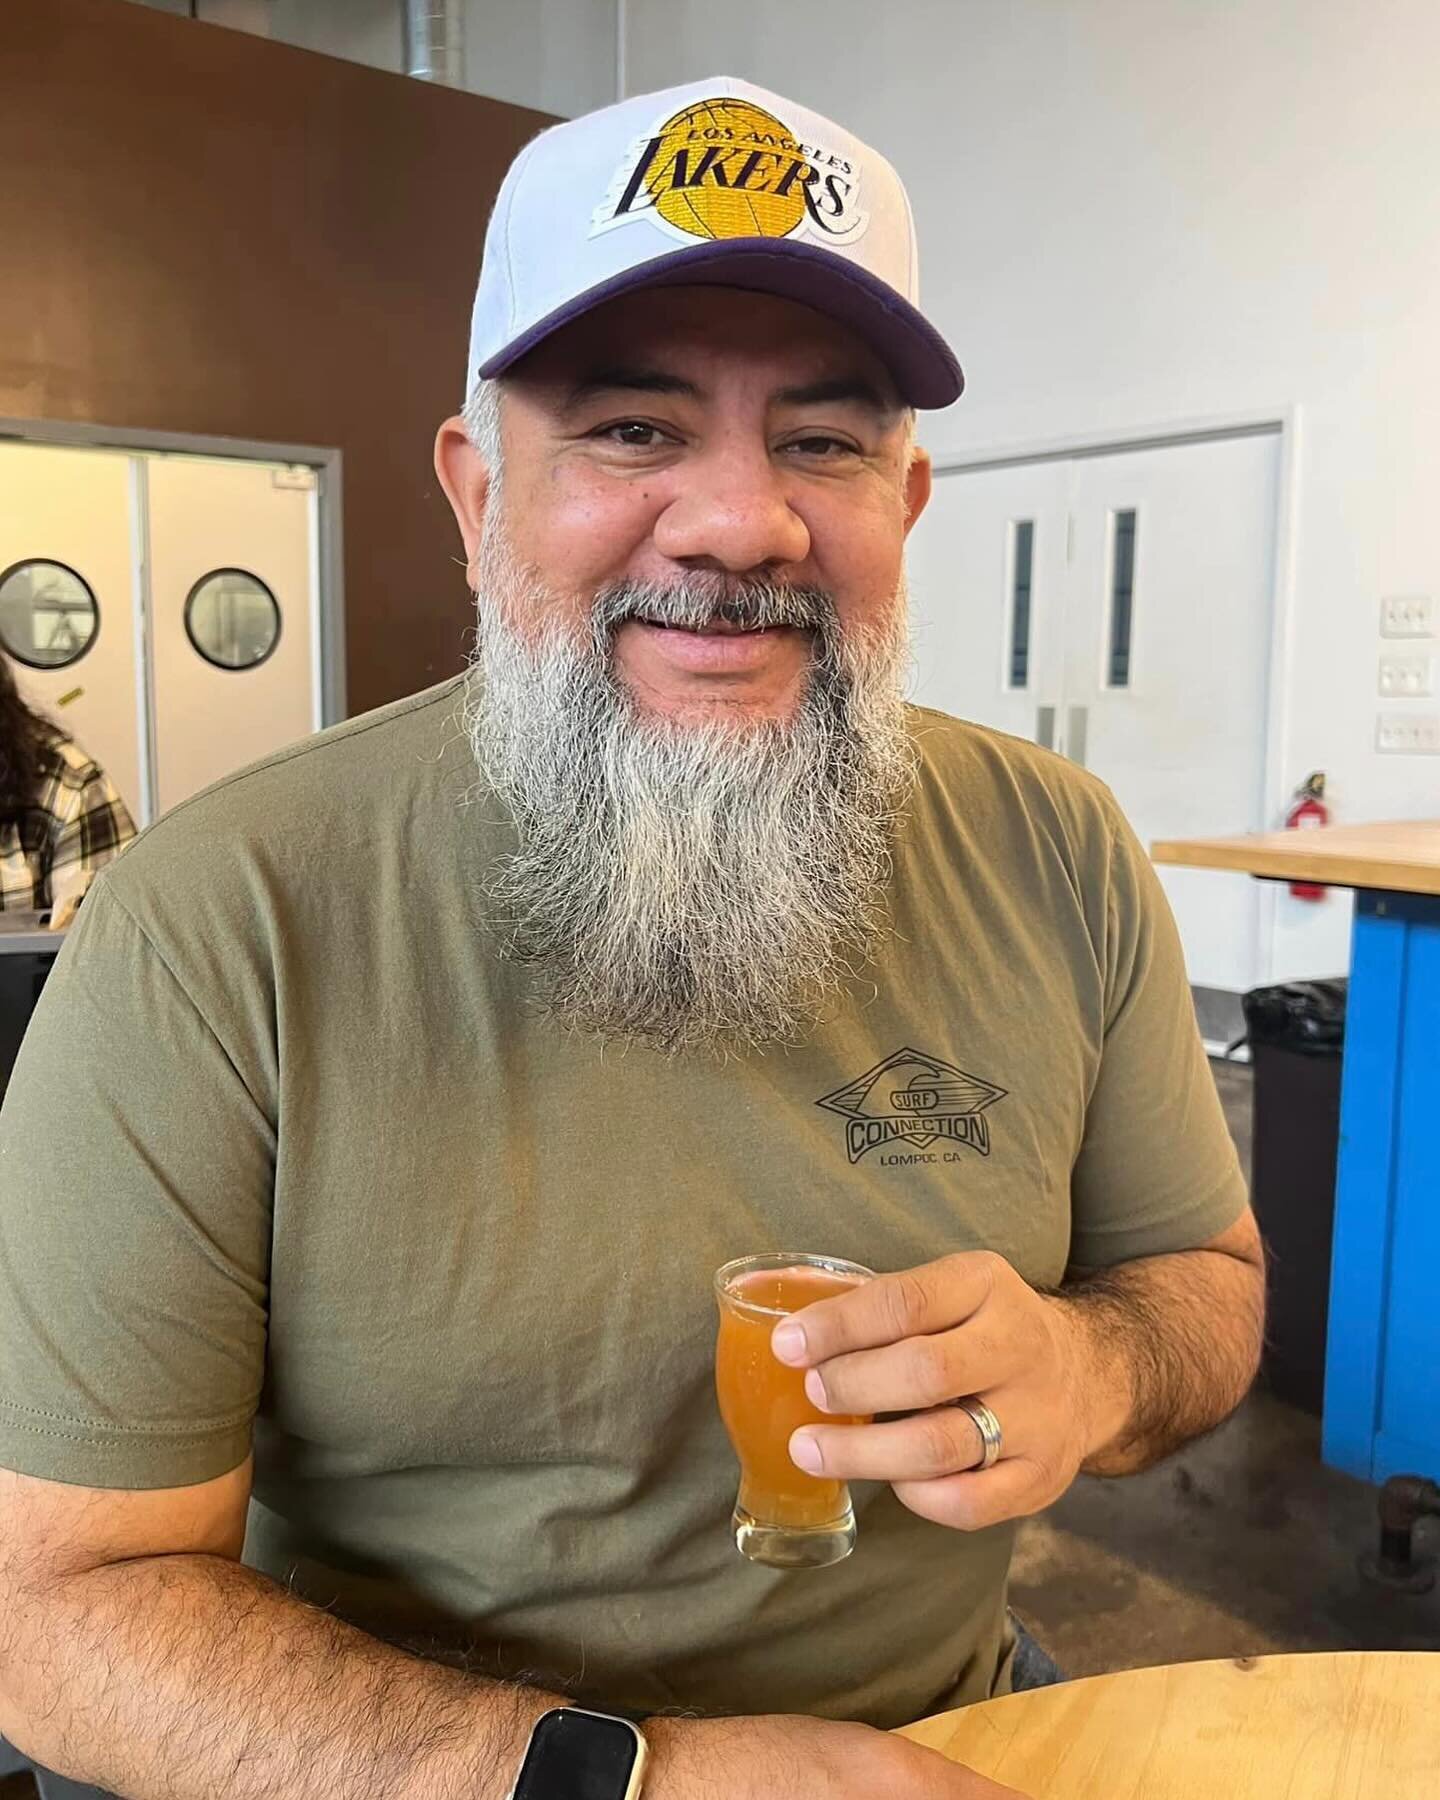 Taking a bit of California to Virginia at the Mustang Sally Brewing Company! Thanks for taking us along and letting us share Teresa and Mauricio! #travelingwithfriends #travelingtuesday #lompoc #surfconnection